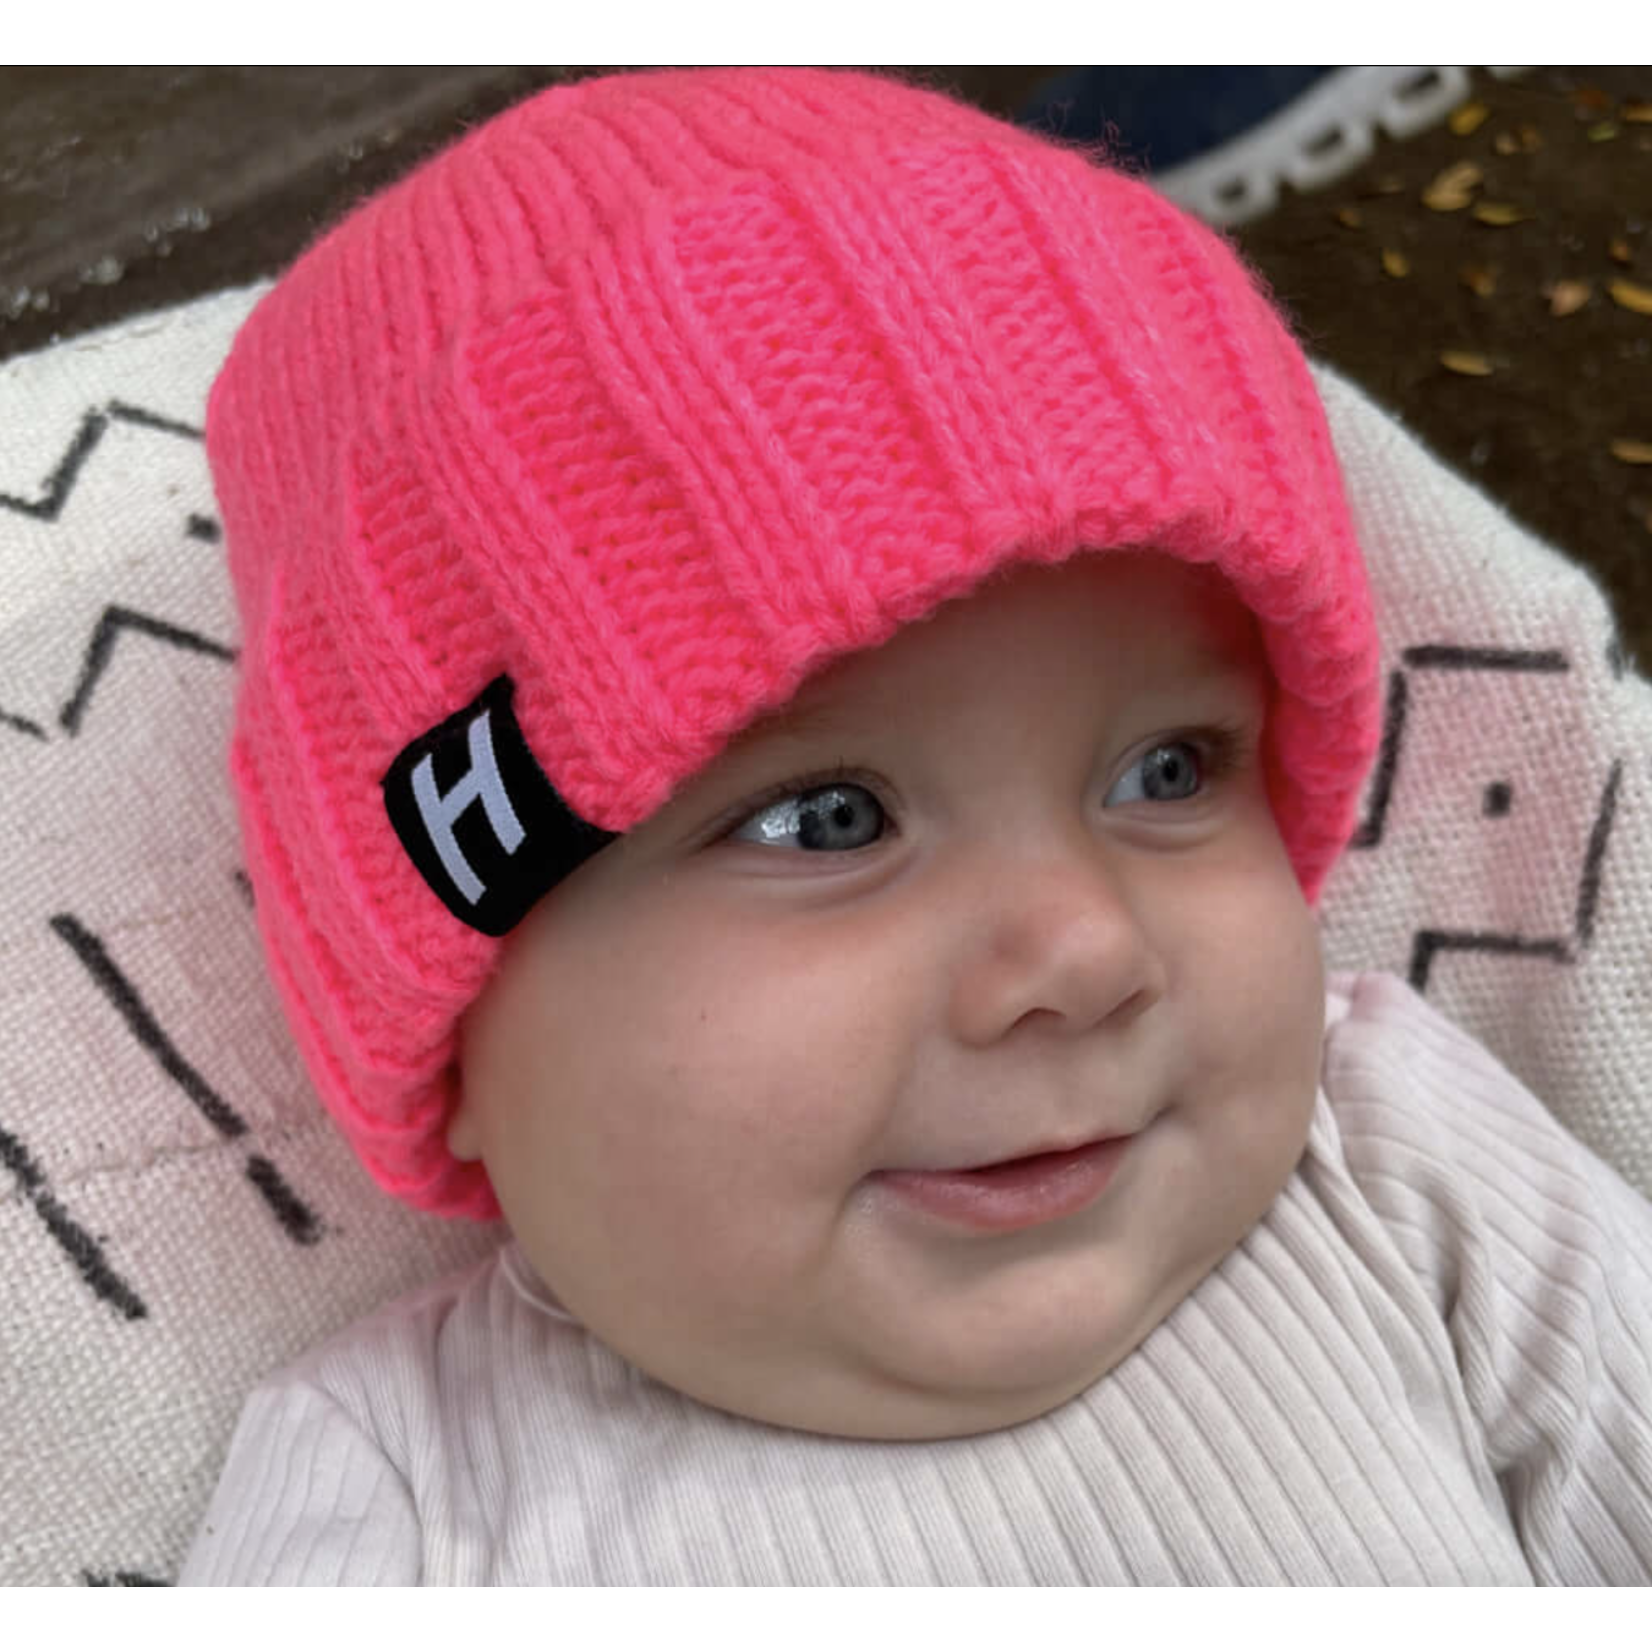 Hipsterkid Classic Beanie - Neon Pink - FINAL SALE